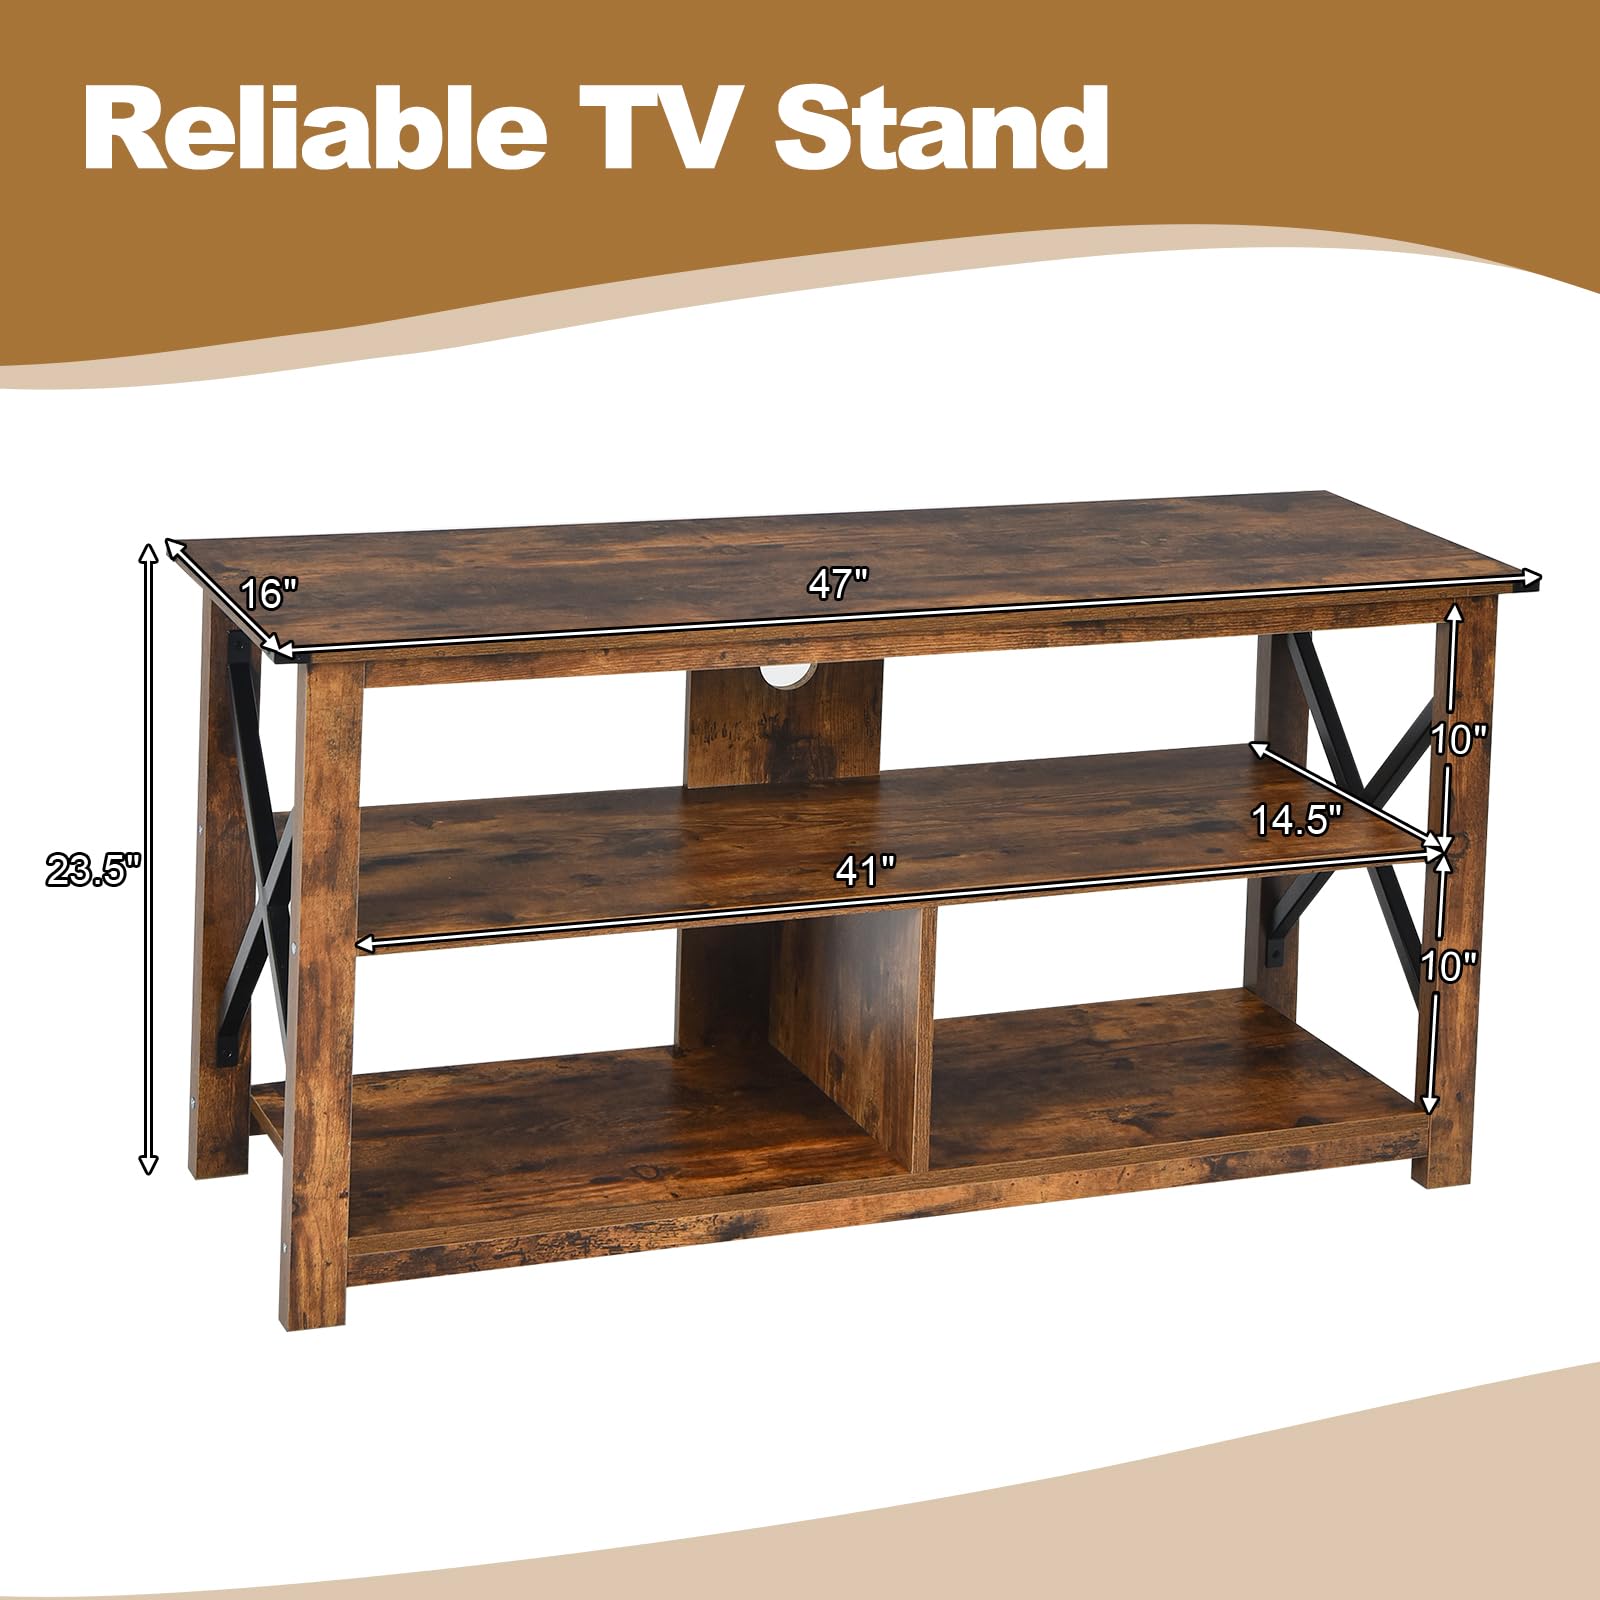 Giantex TV Stand for Bedroom, TV Cabinet for TV Up to 55"